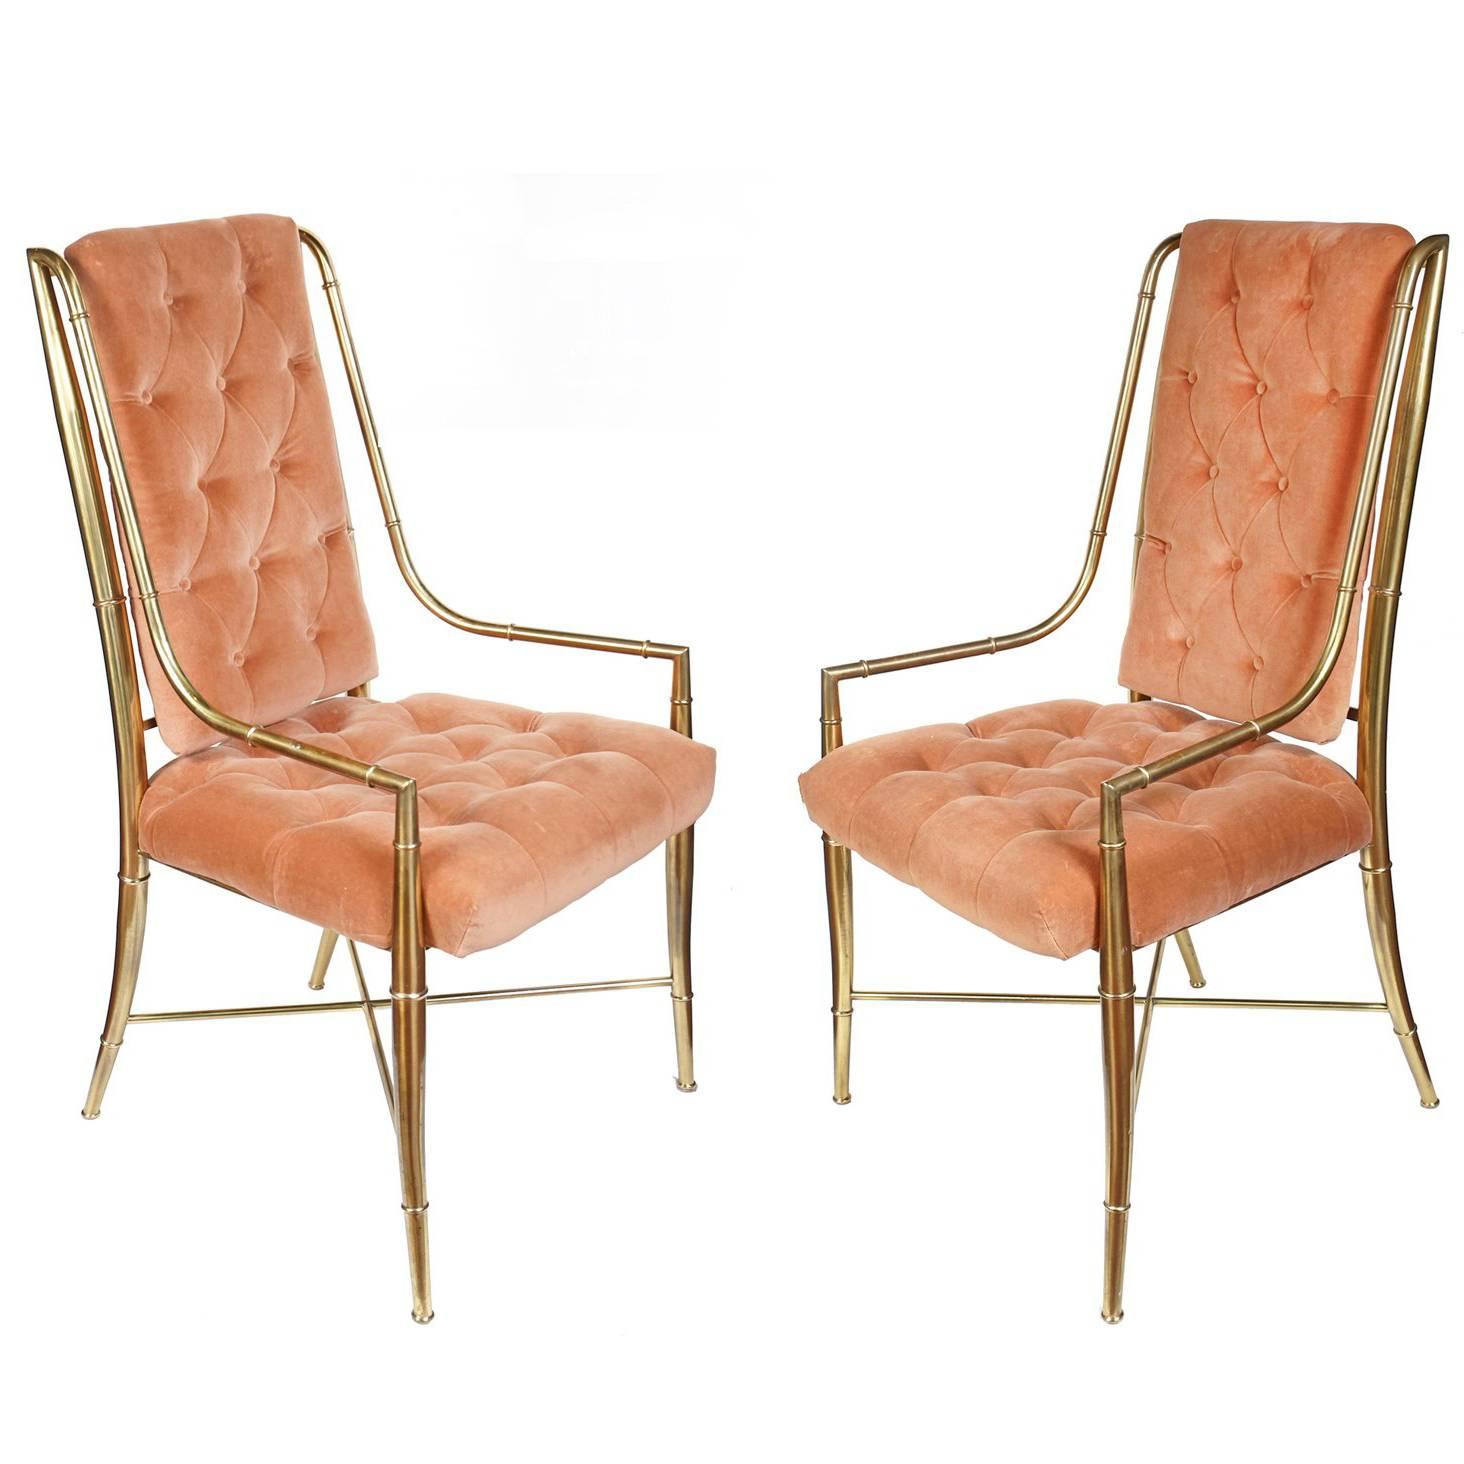 Pair of Mastercraft Brass and Upholstered Side or Dining Chairs